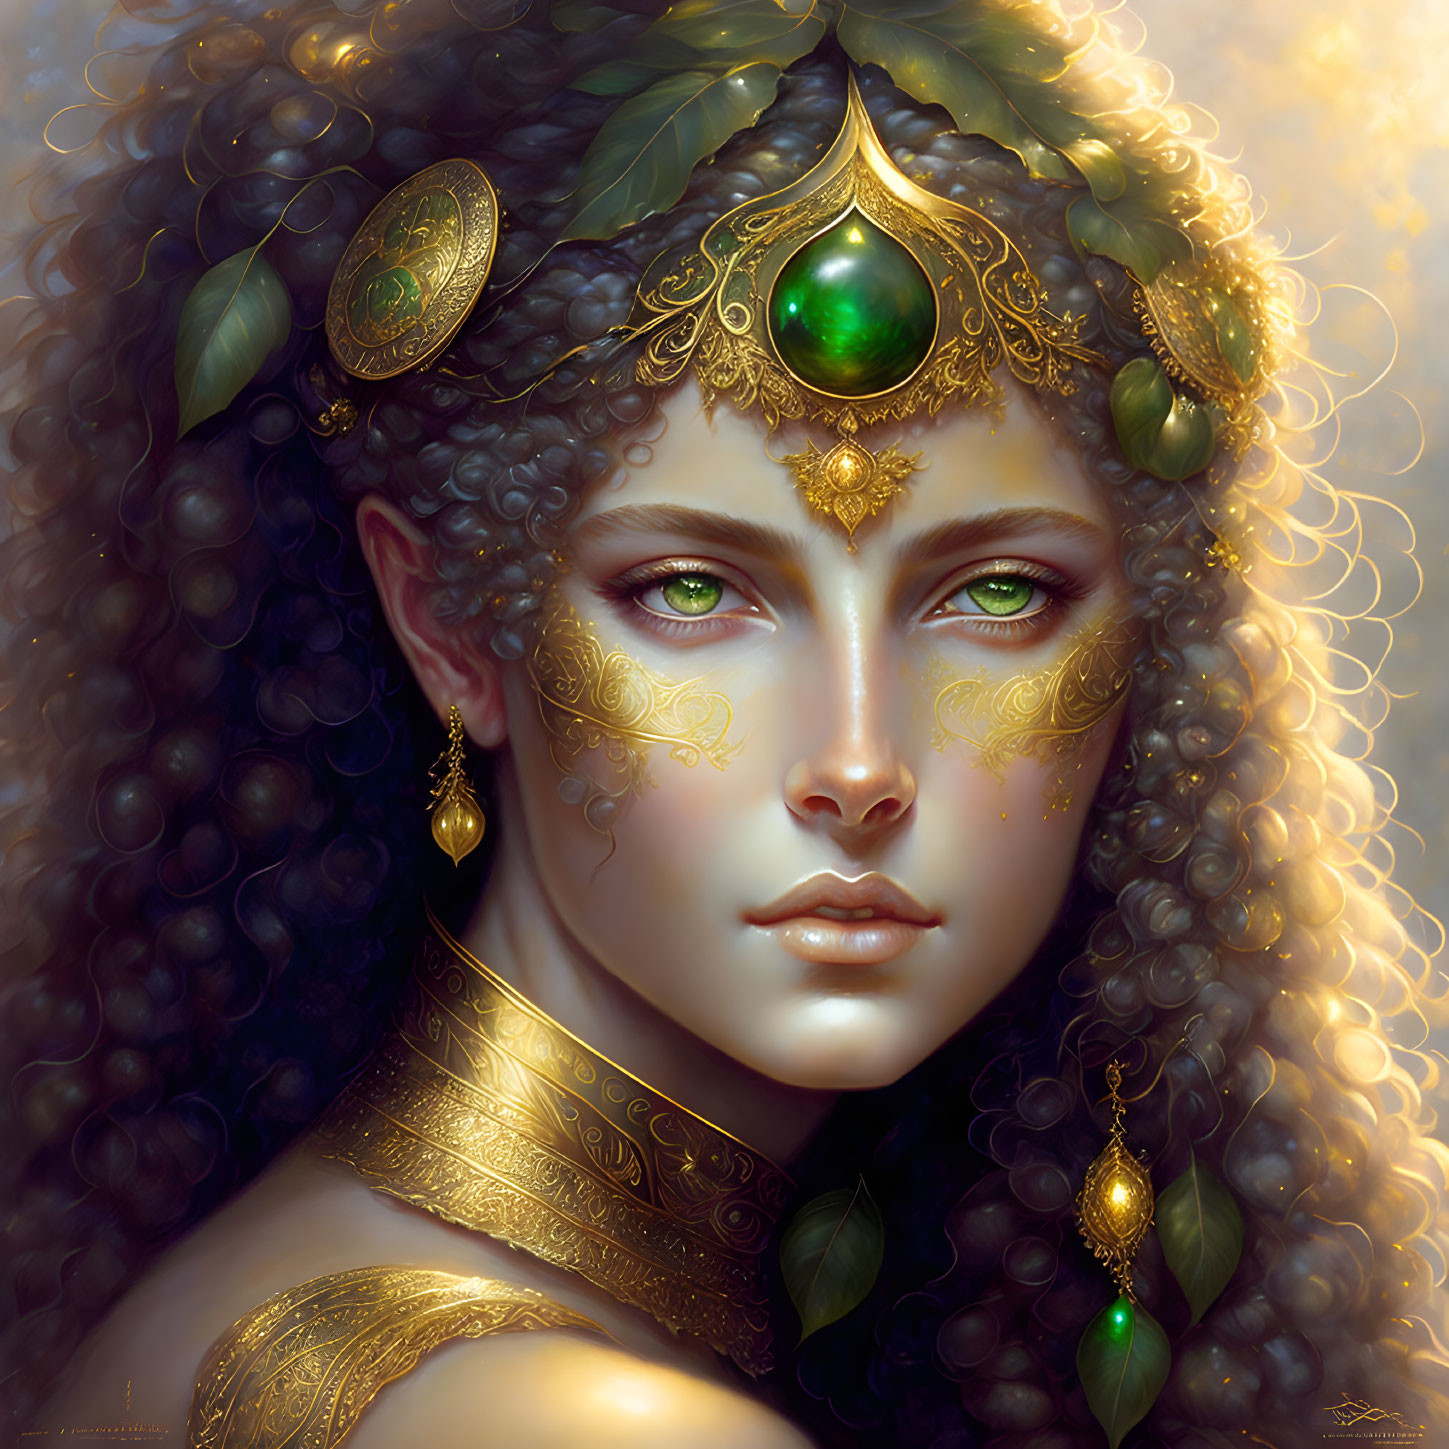 Fantasy portrait of a woman with curly hair and gold jewelry, featuring a green gem on her forehead